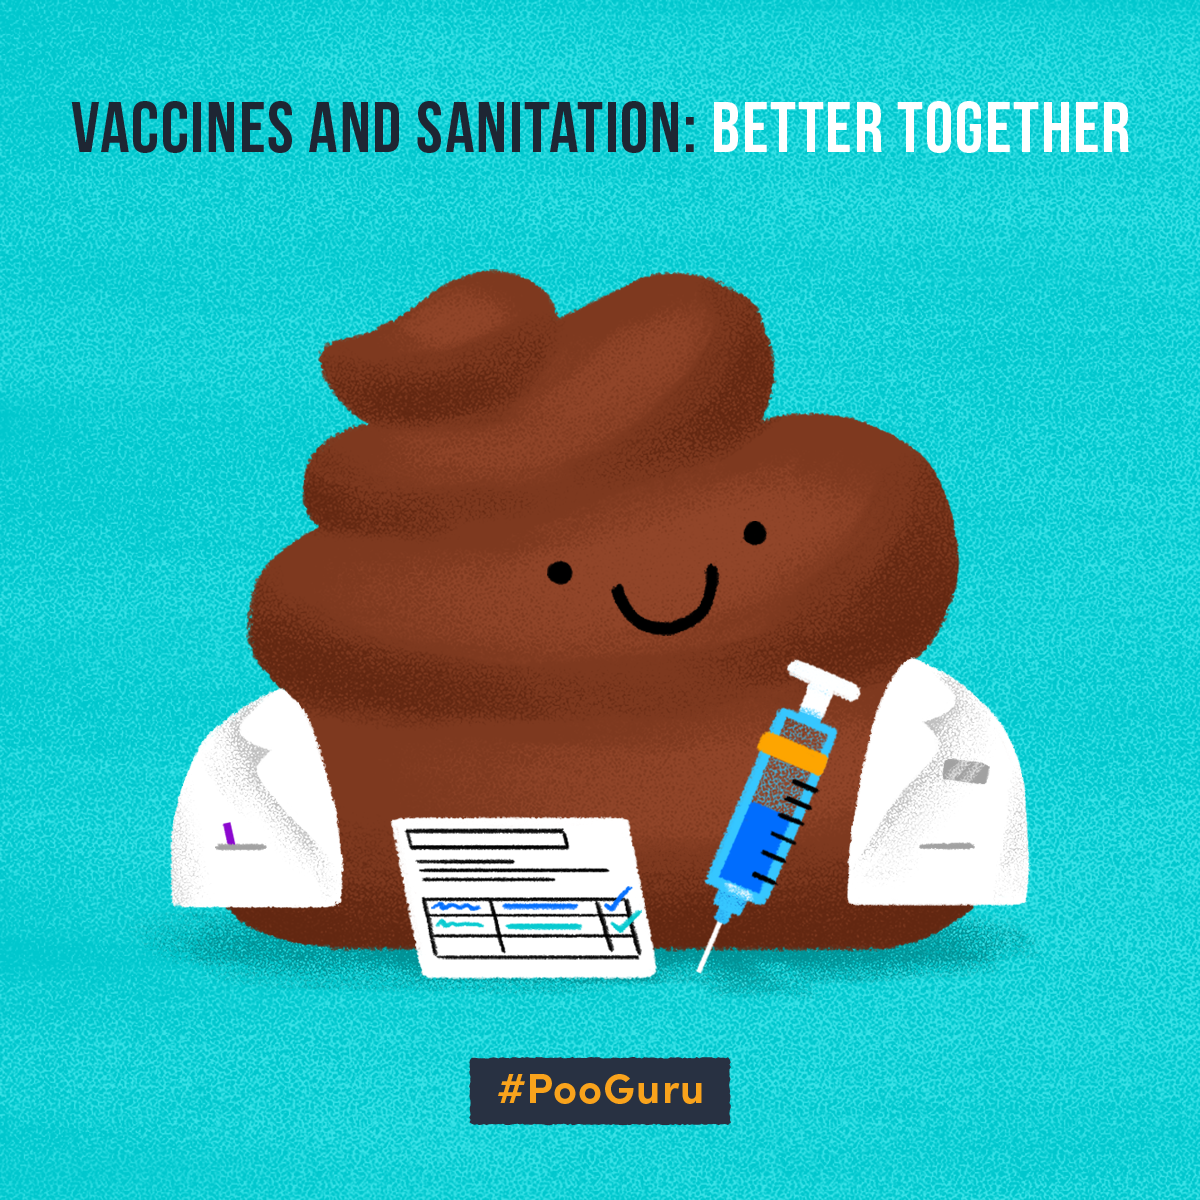 Vaccines and hygiene and sanitation work better together